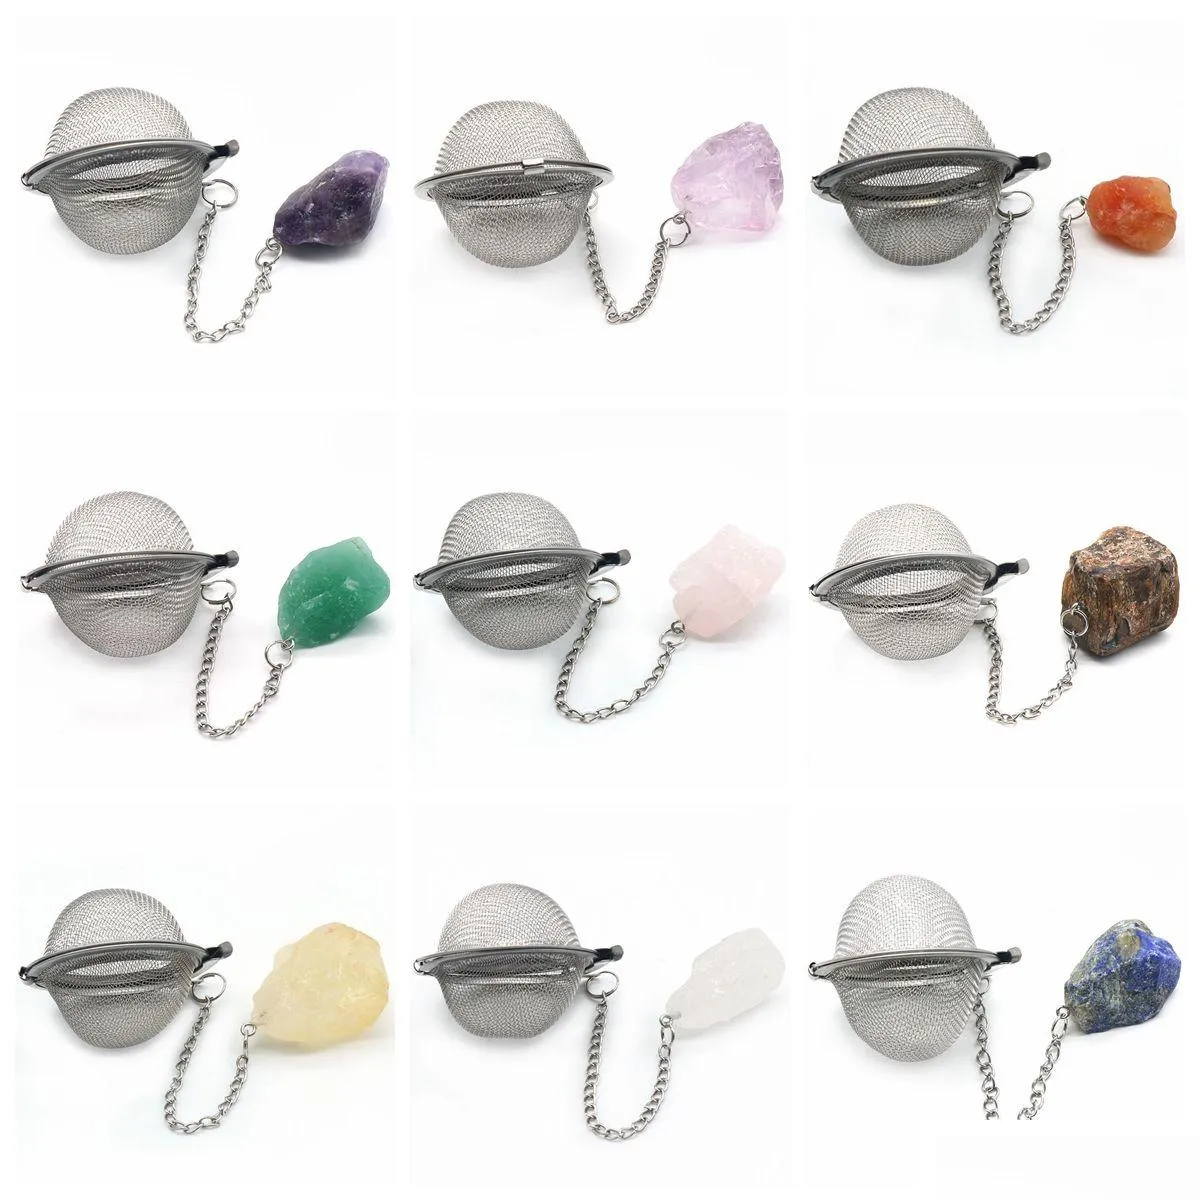 Key Rings Infusers For Loose Tea Mesh Strainer With Extended Chain Hook Stainless Steel Charm Energy Drip Trays Crystal Shaker Ball Dr Dhfun